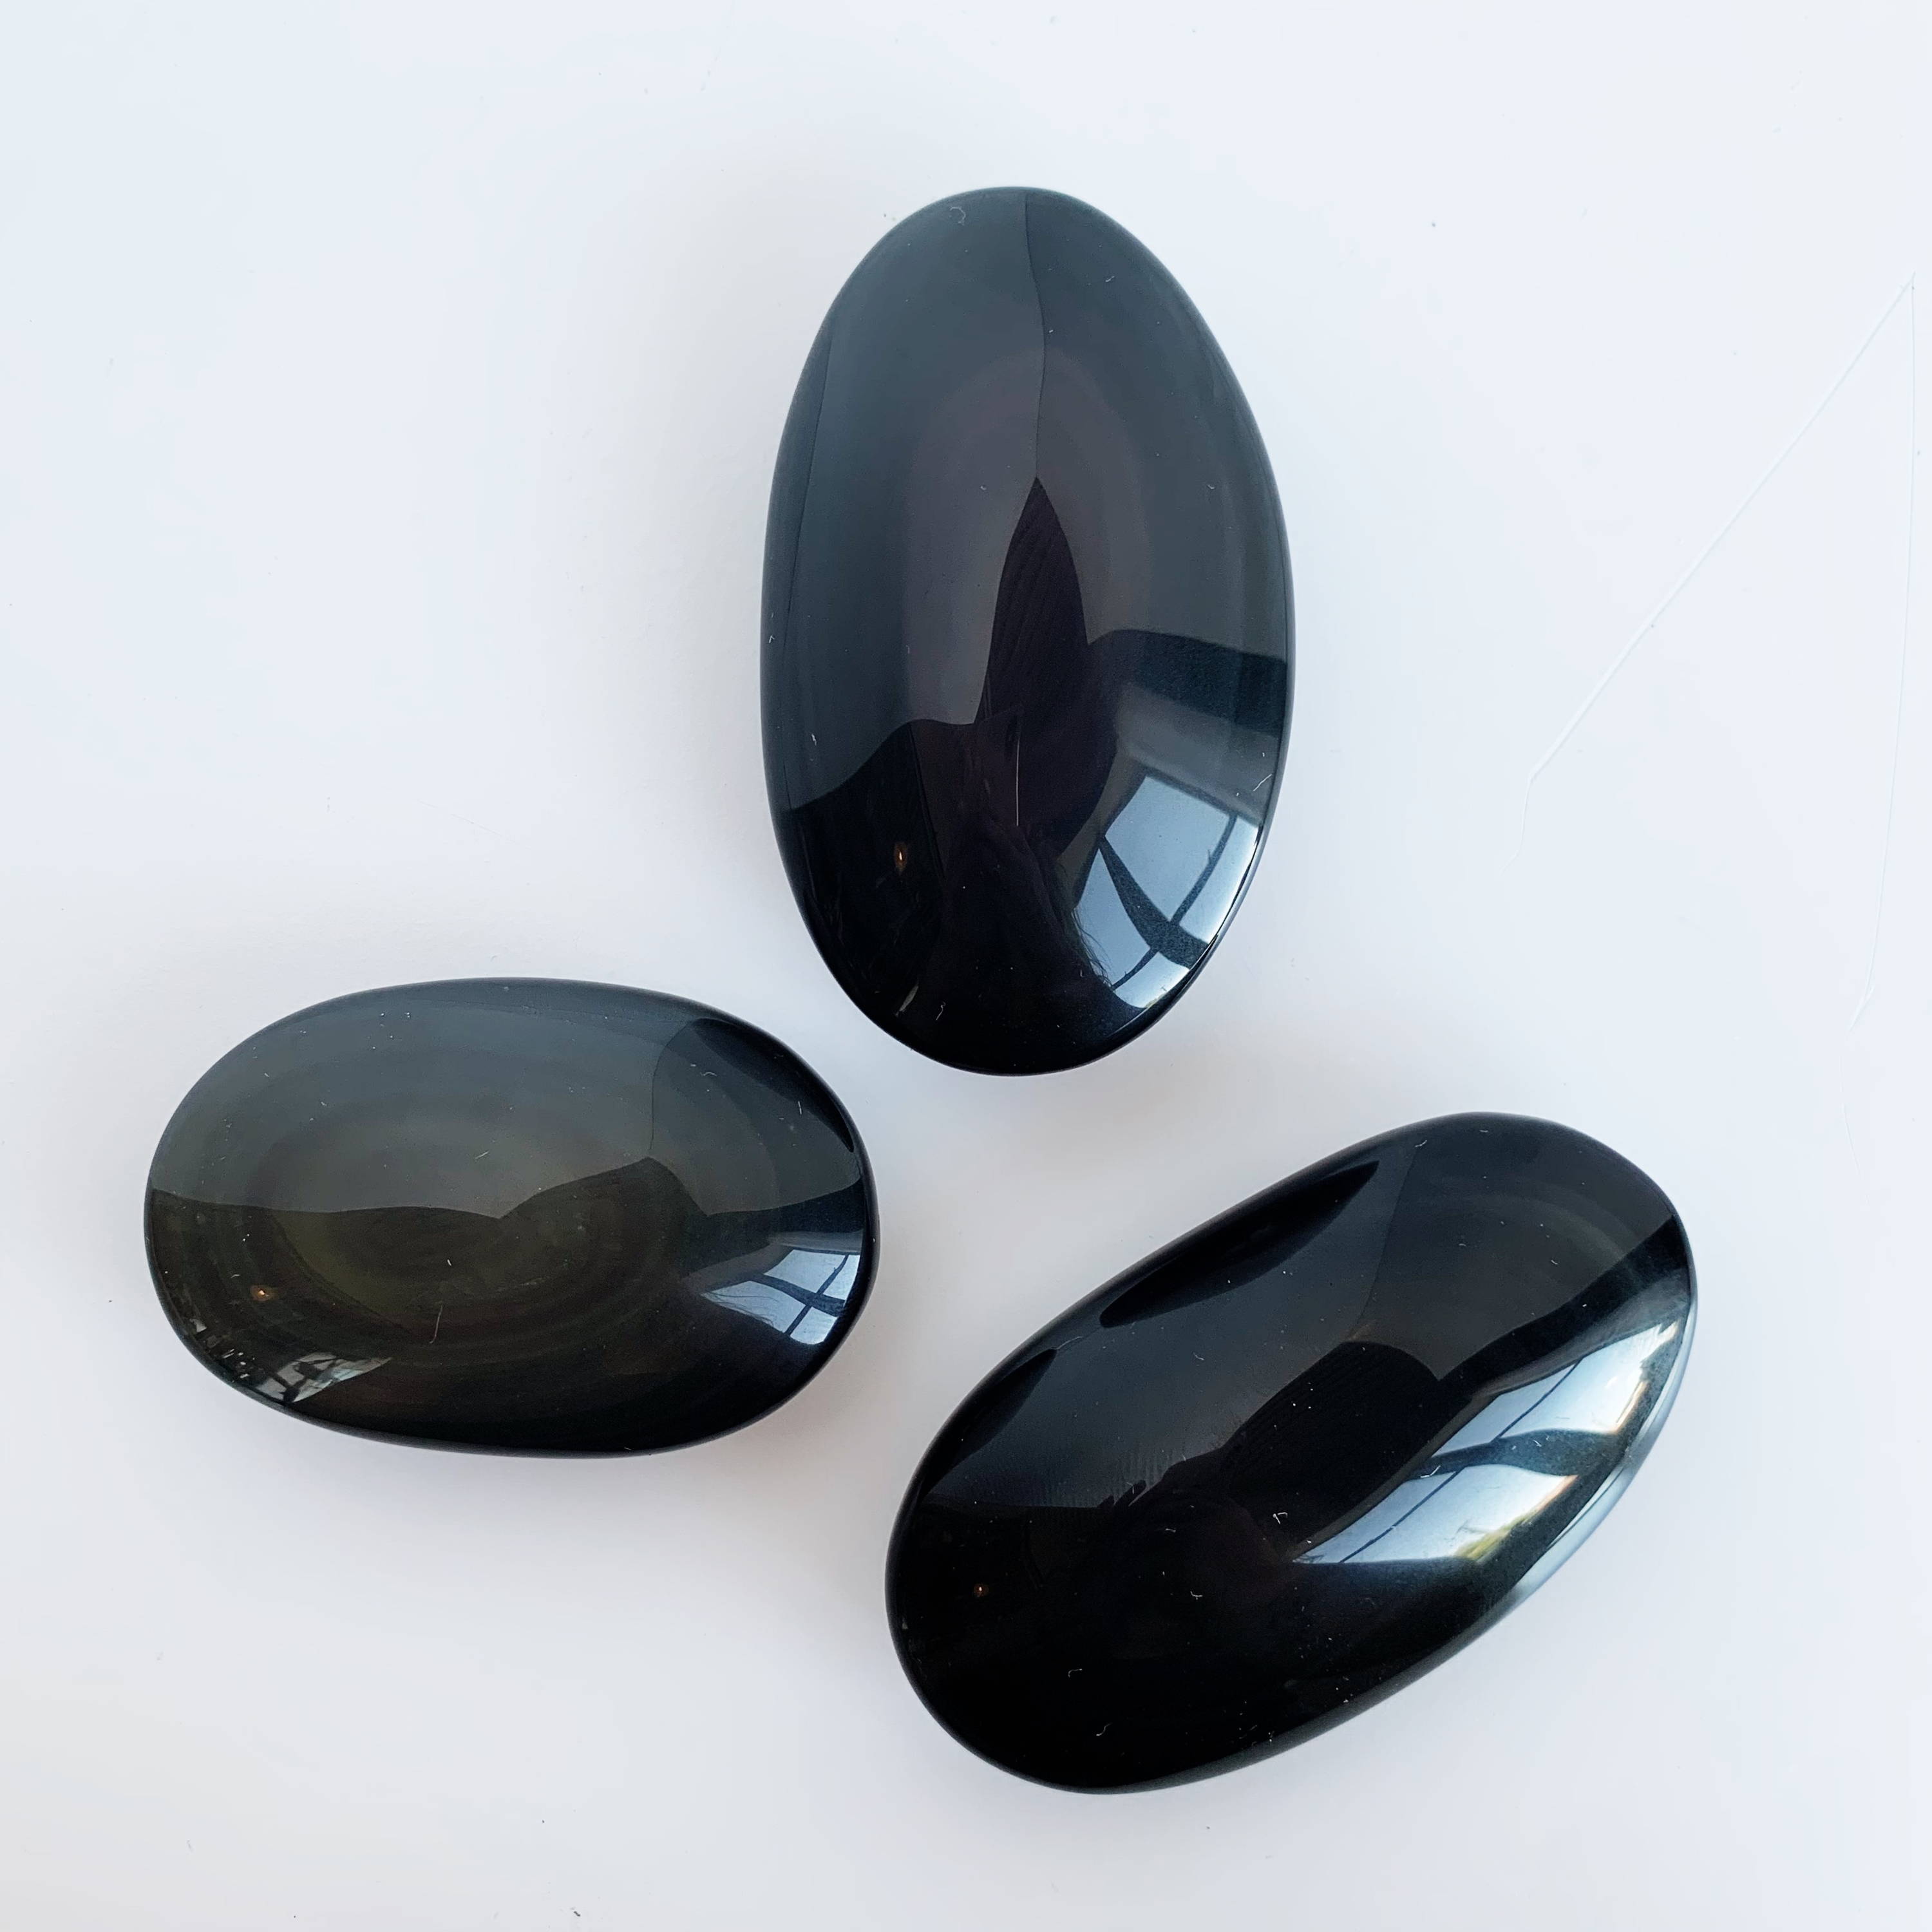 Rainbow Obsidian Palm Stones on a white background